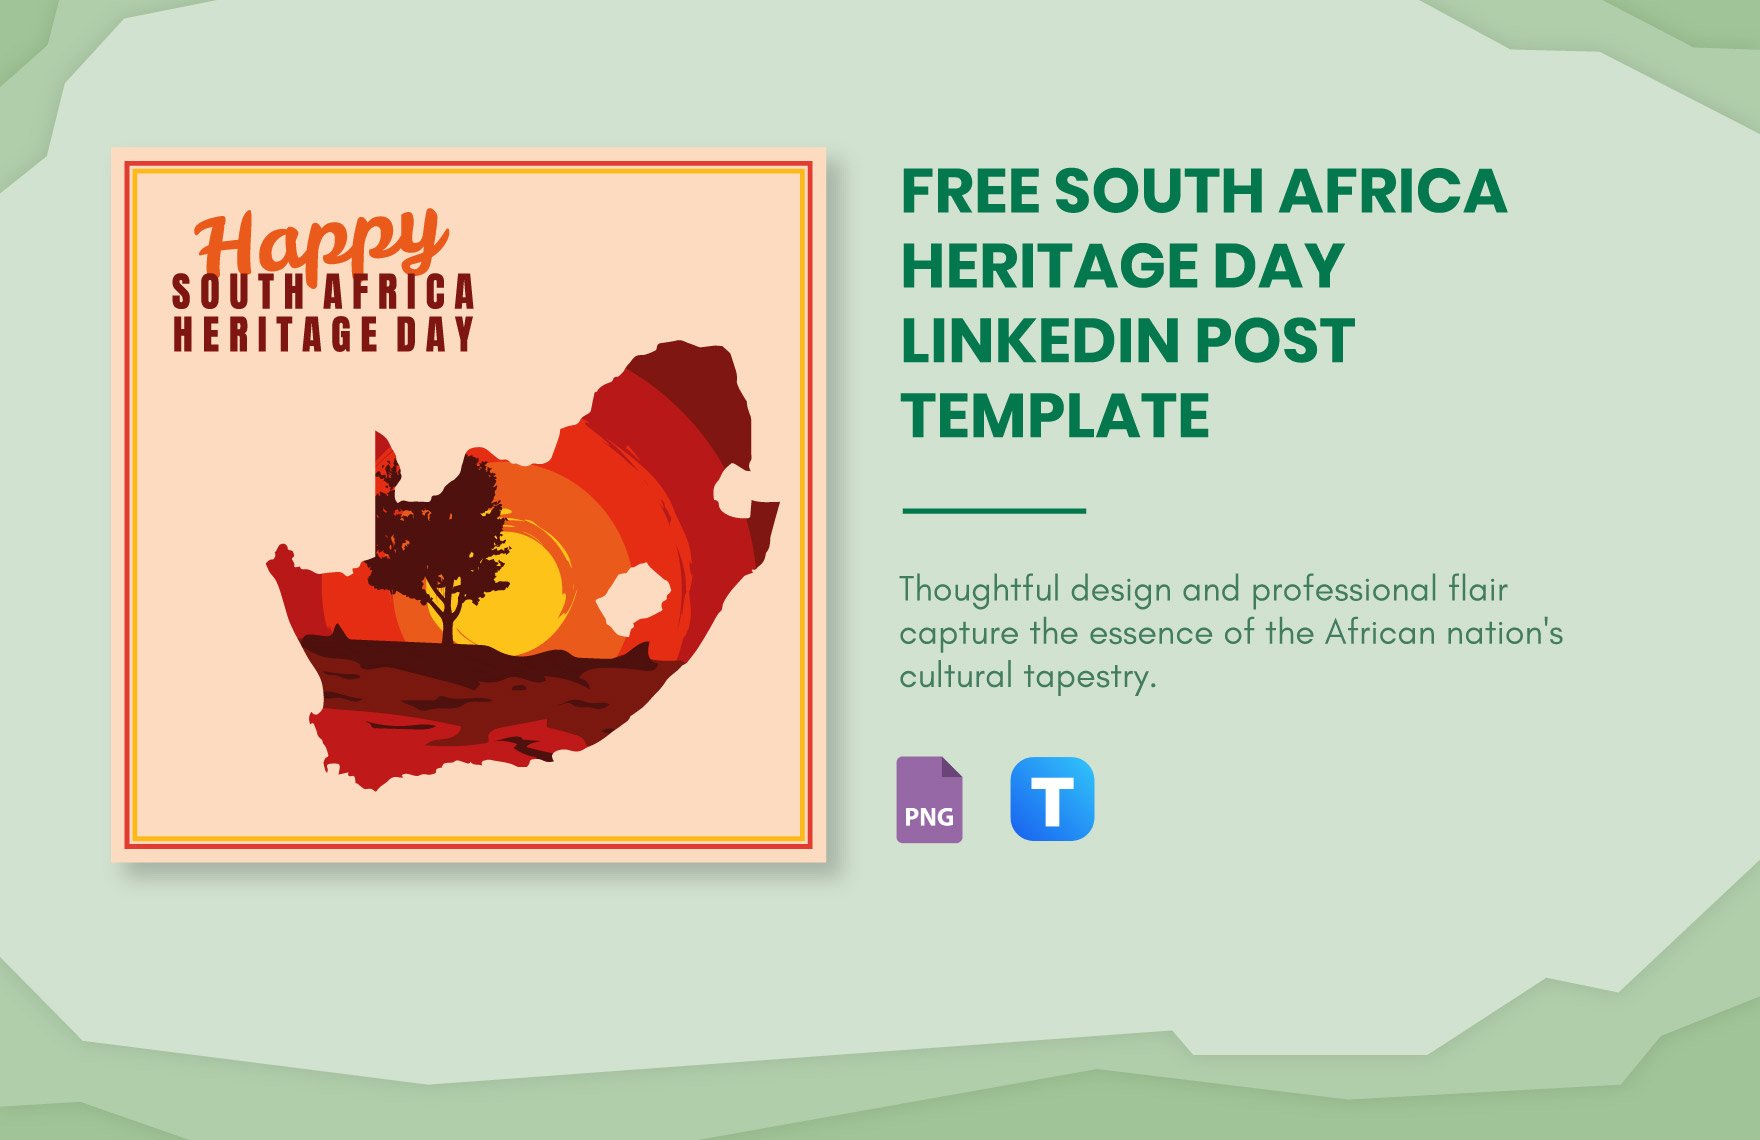 Free South Africa Heritage Day LinkedIn Post Template in PNG